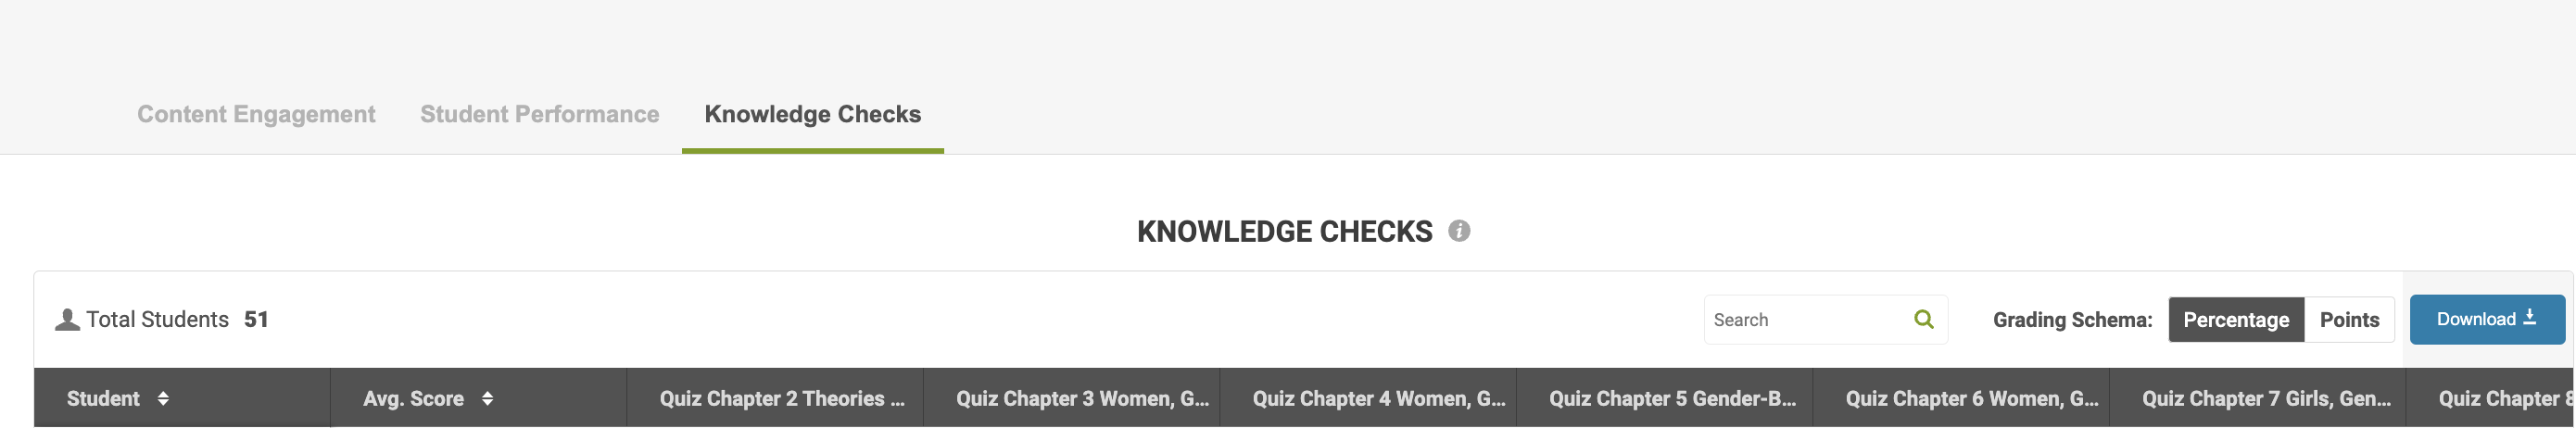 Knowledge Checks instructor dashboard.png